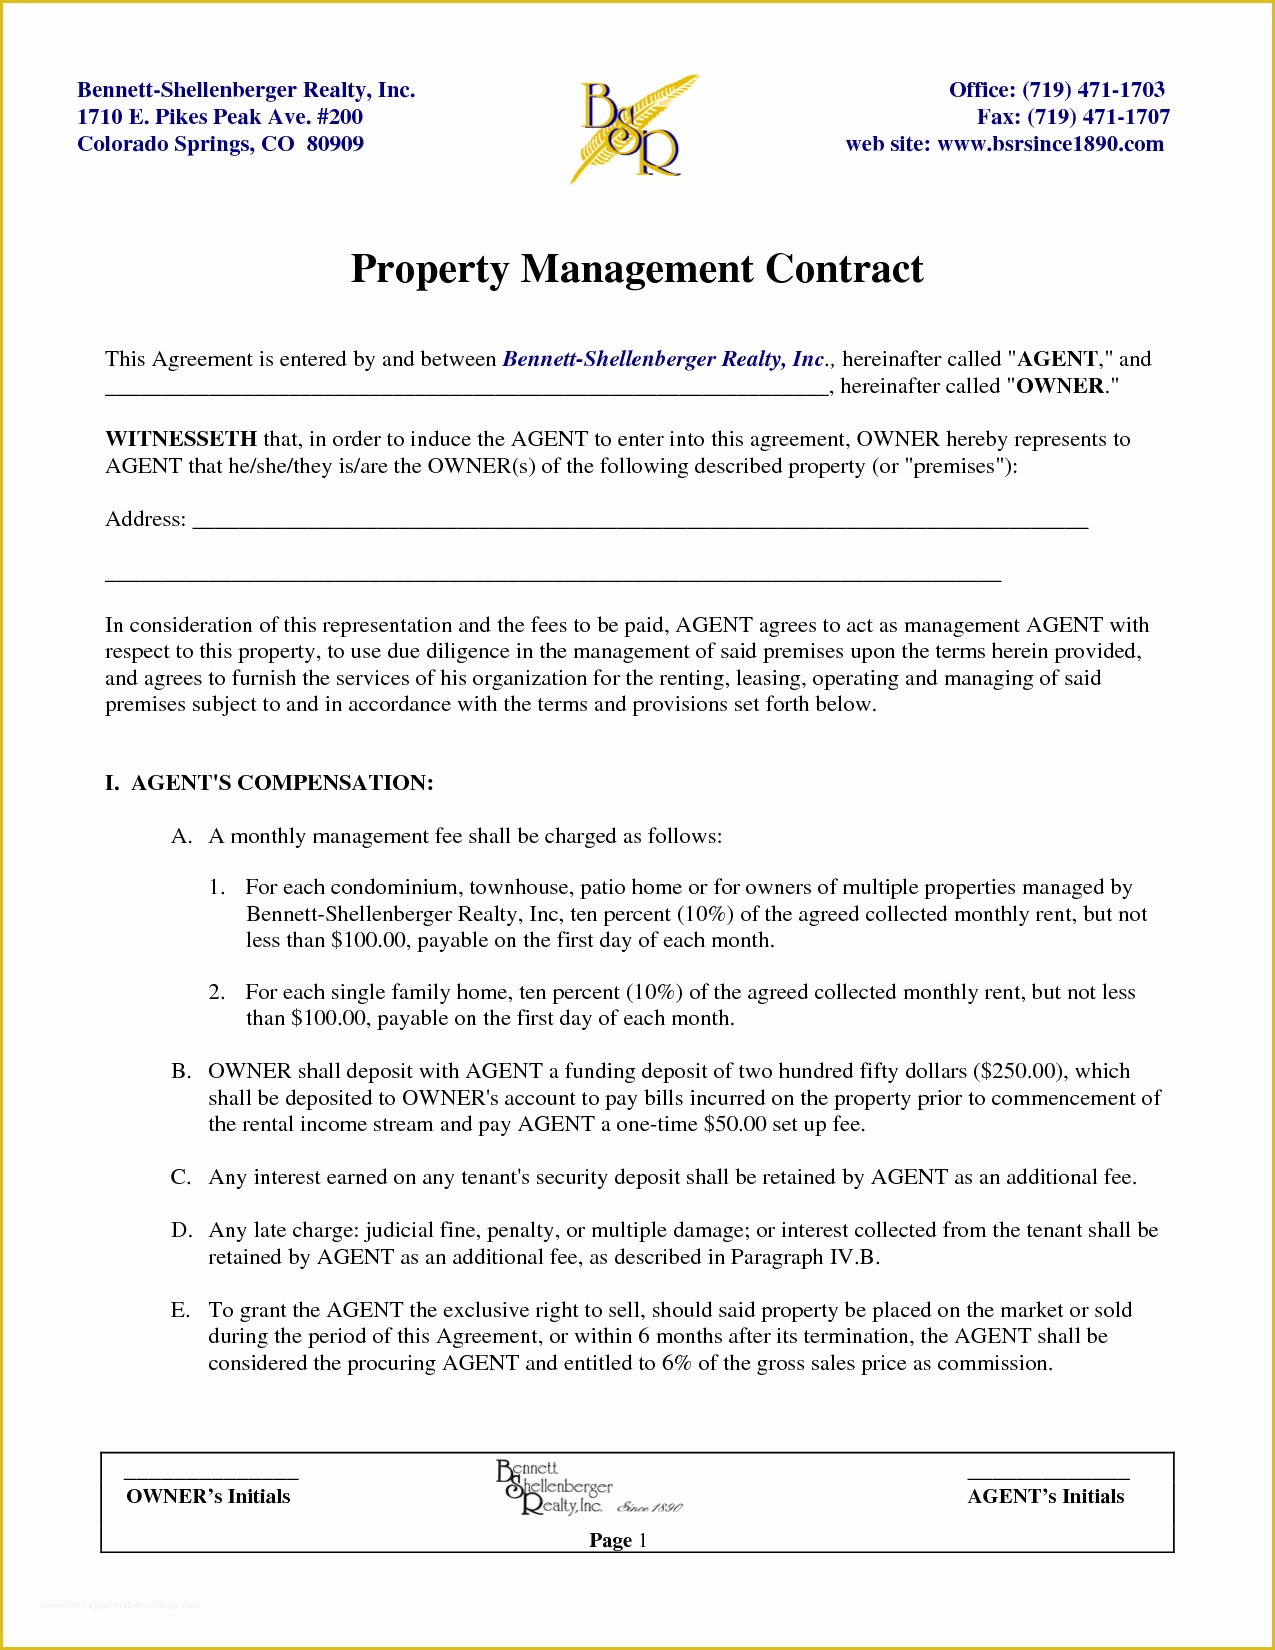 Property Management Agreement Template Free Of Building Monitoring forms with Templates – Blog